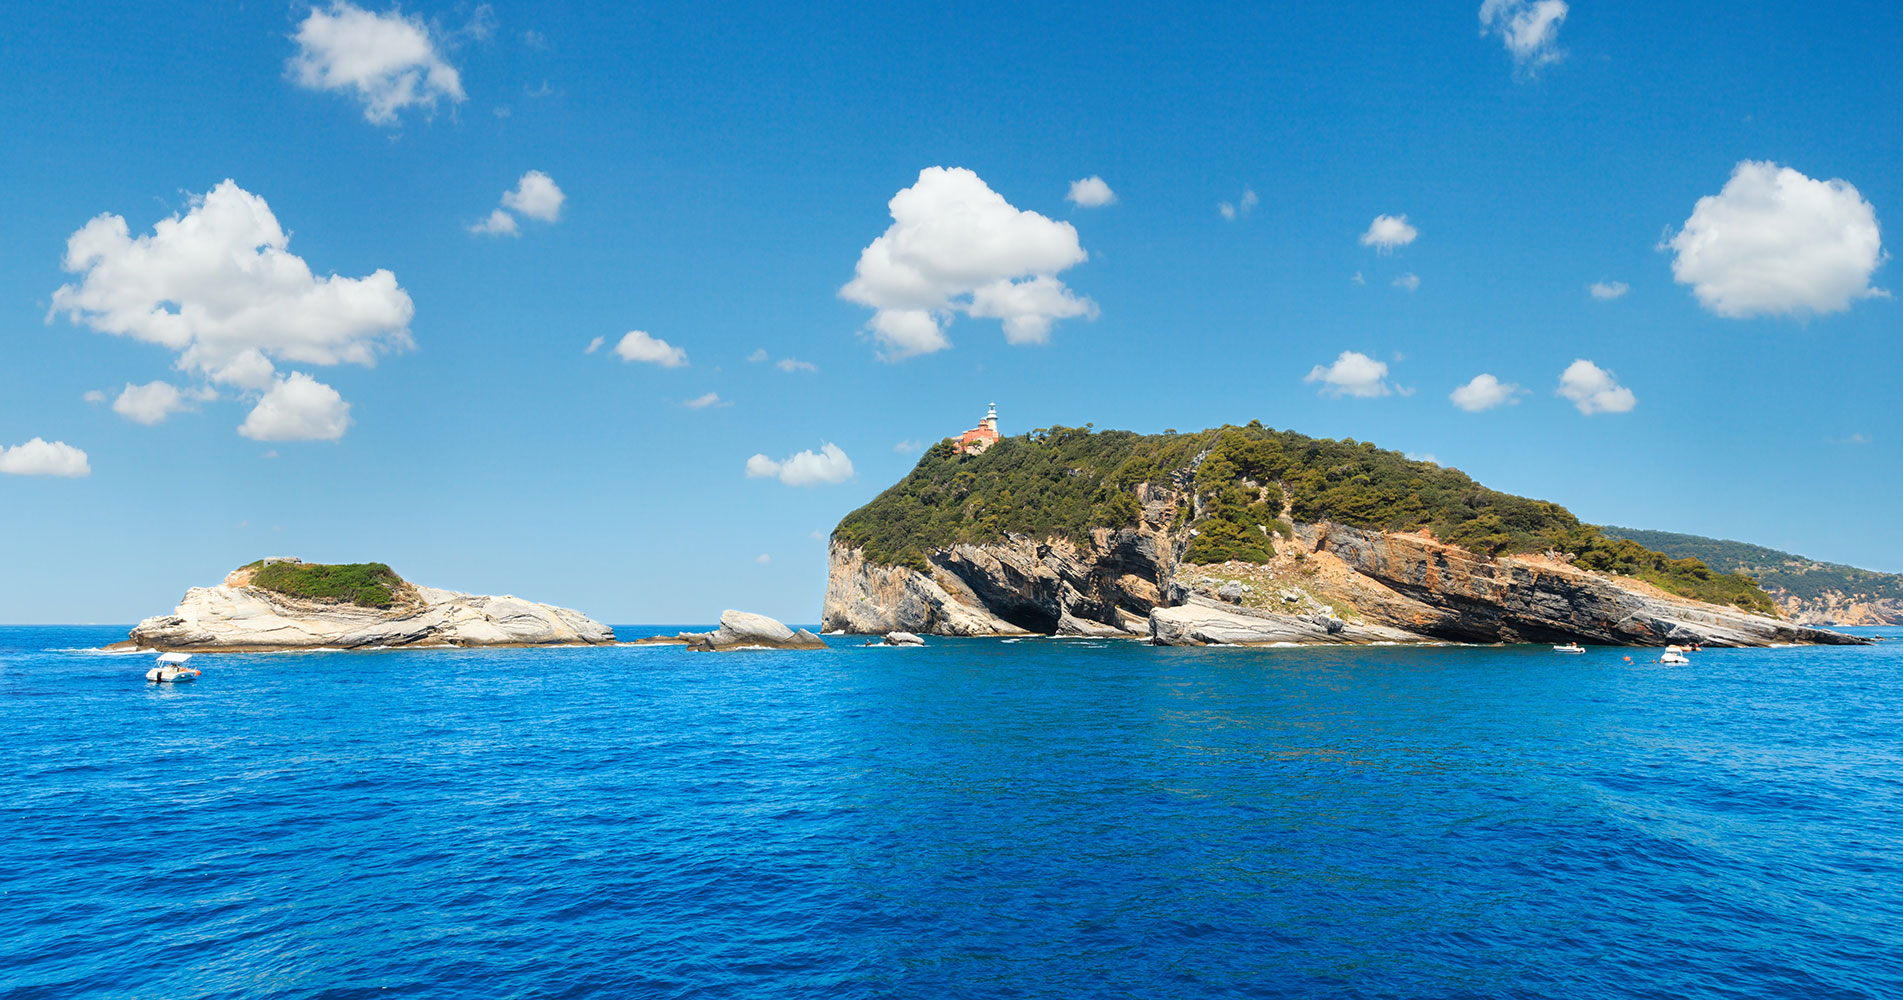 Photo of the two islands Tino and Tinetto in front of the Palmaria Island